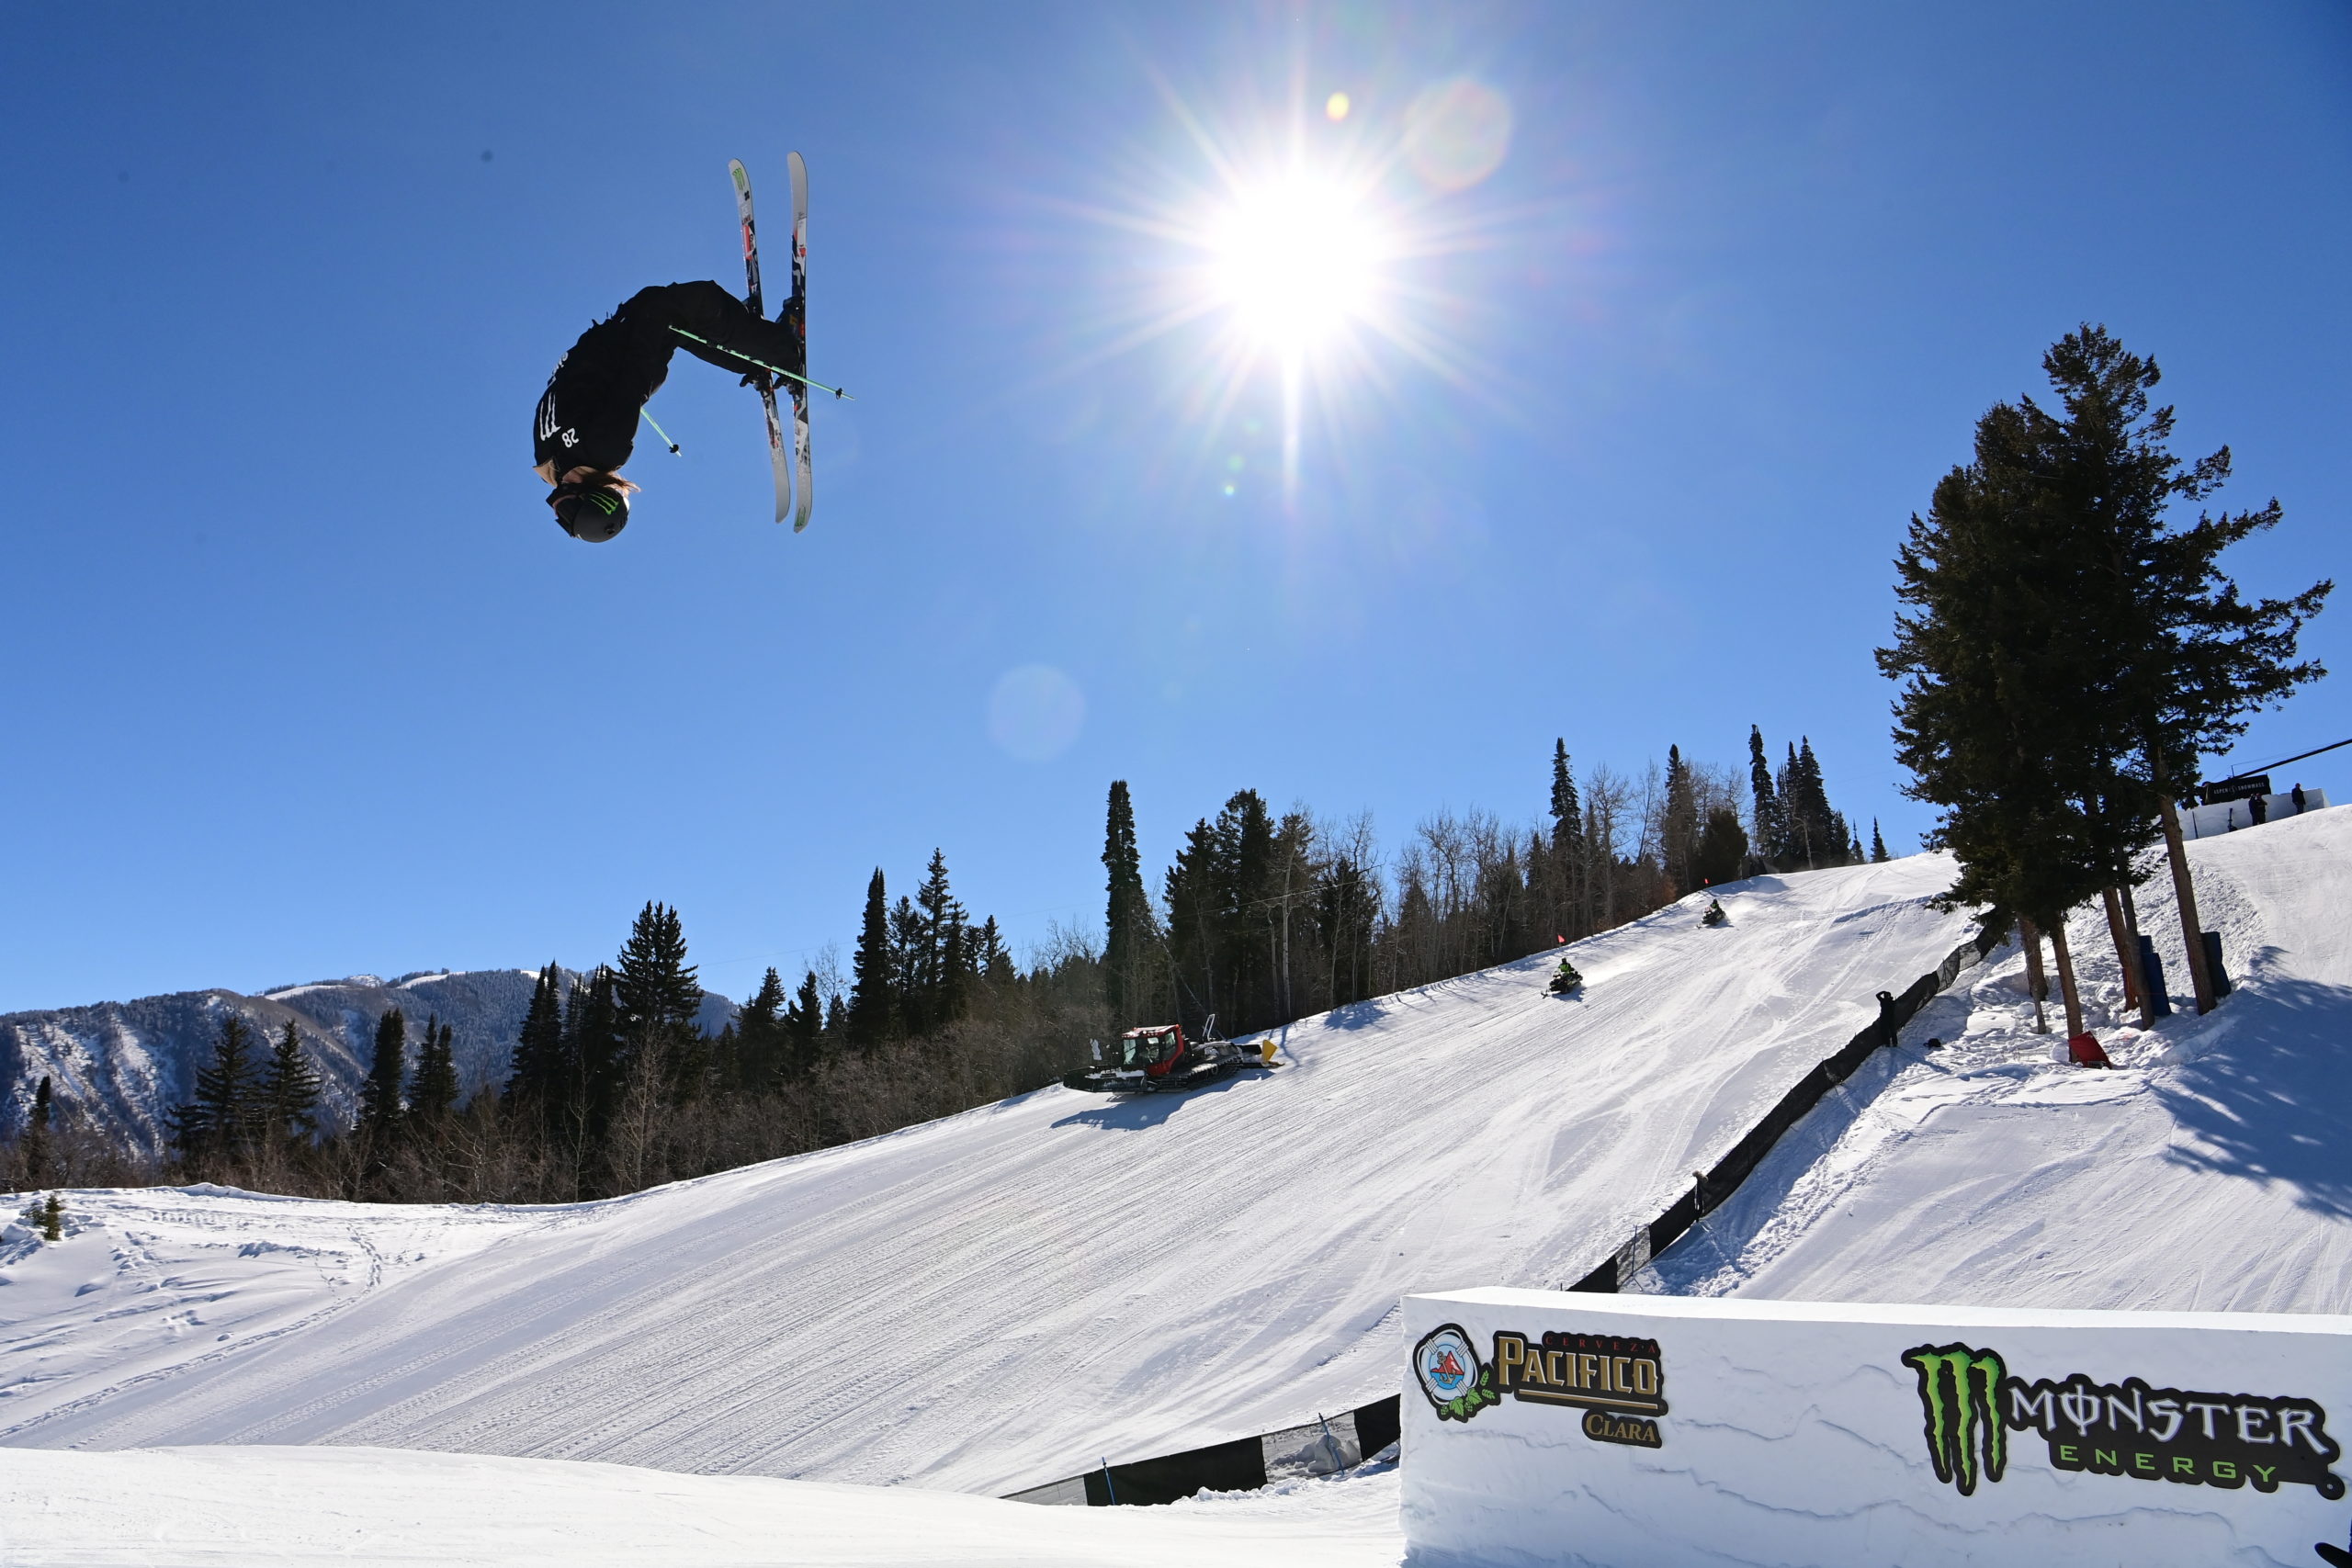 GB SNOWSPORT TEAM SELECTED FOR THE 2021 FIS FREESKI AND FREESTYLE SNOWBOARD WORLD CHAMPIONSHIPS